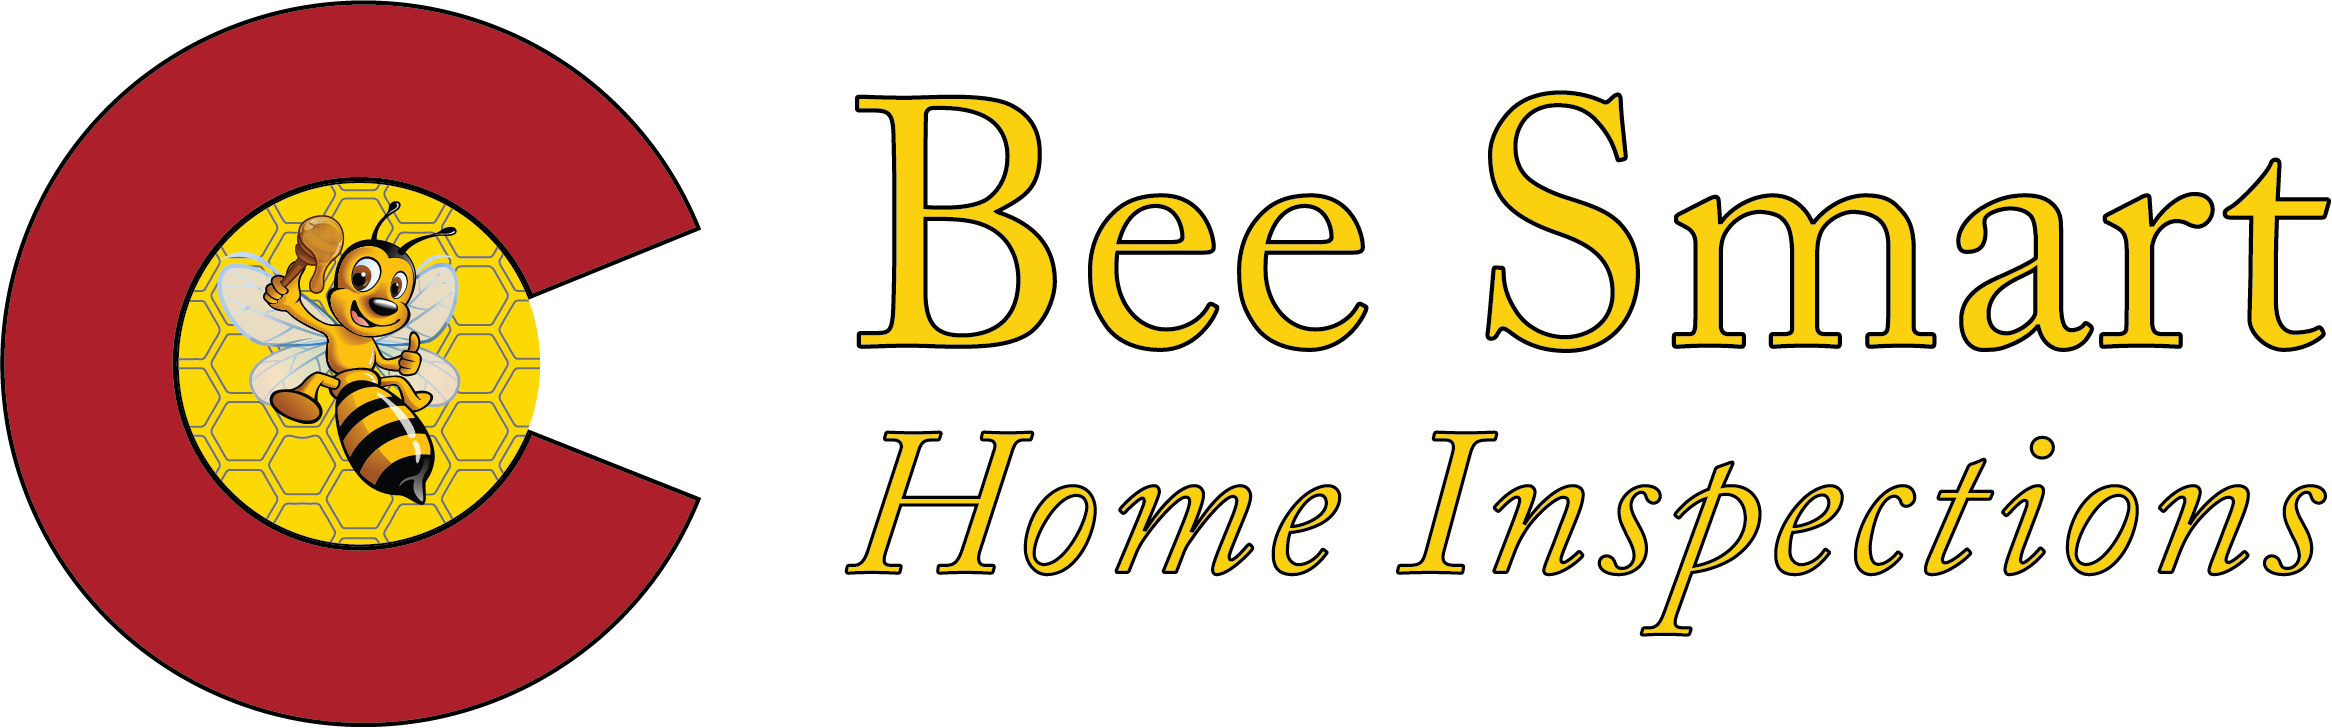 Bee-Smart-Home-Inspections-Outlines